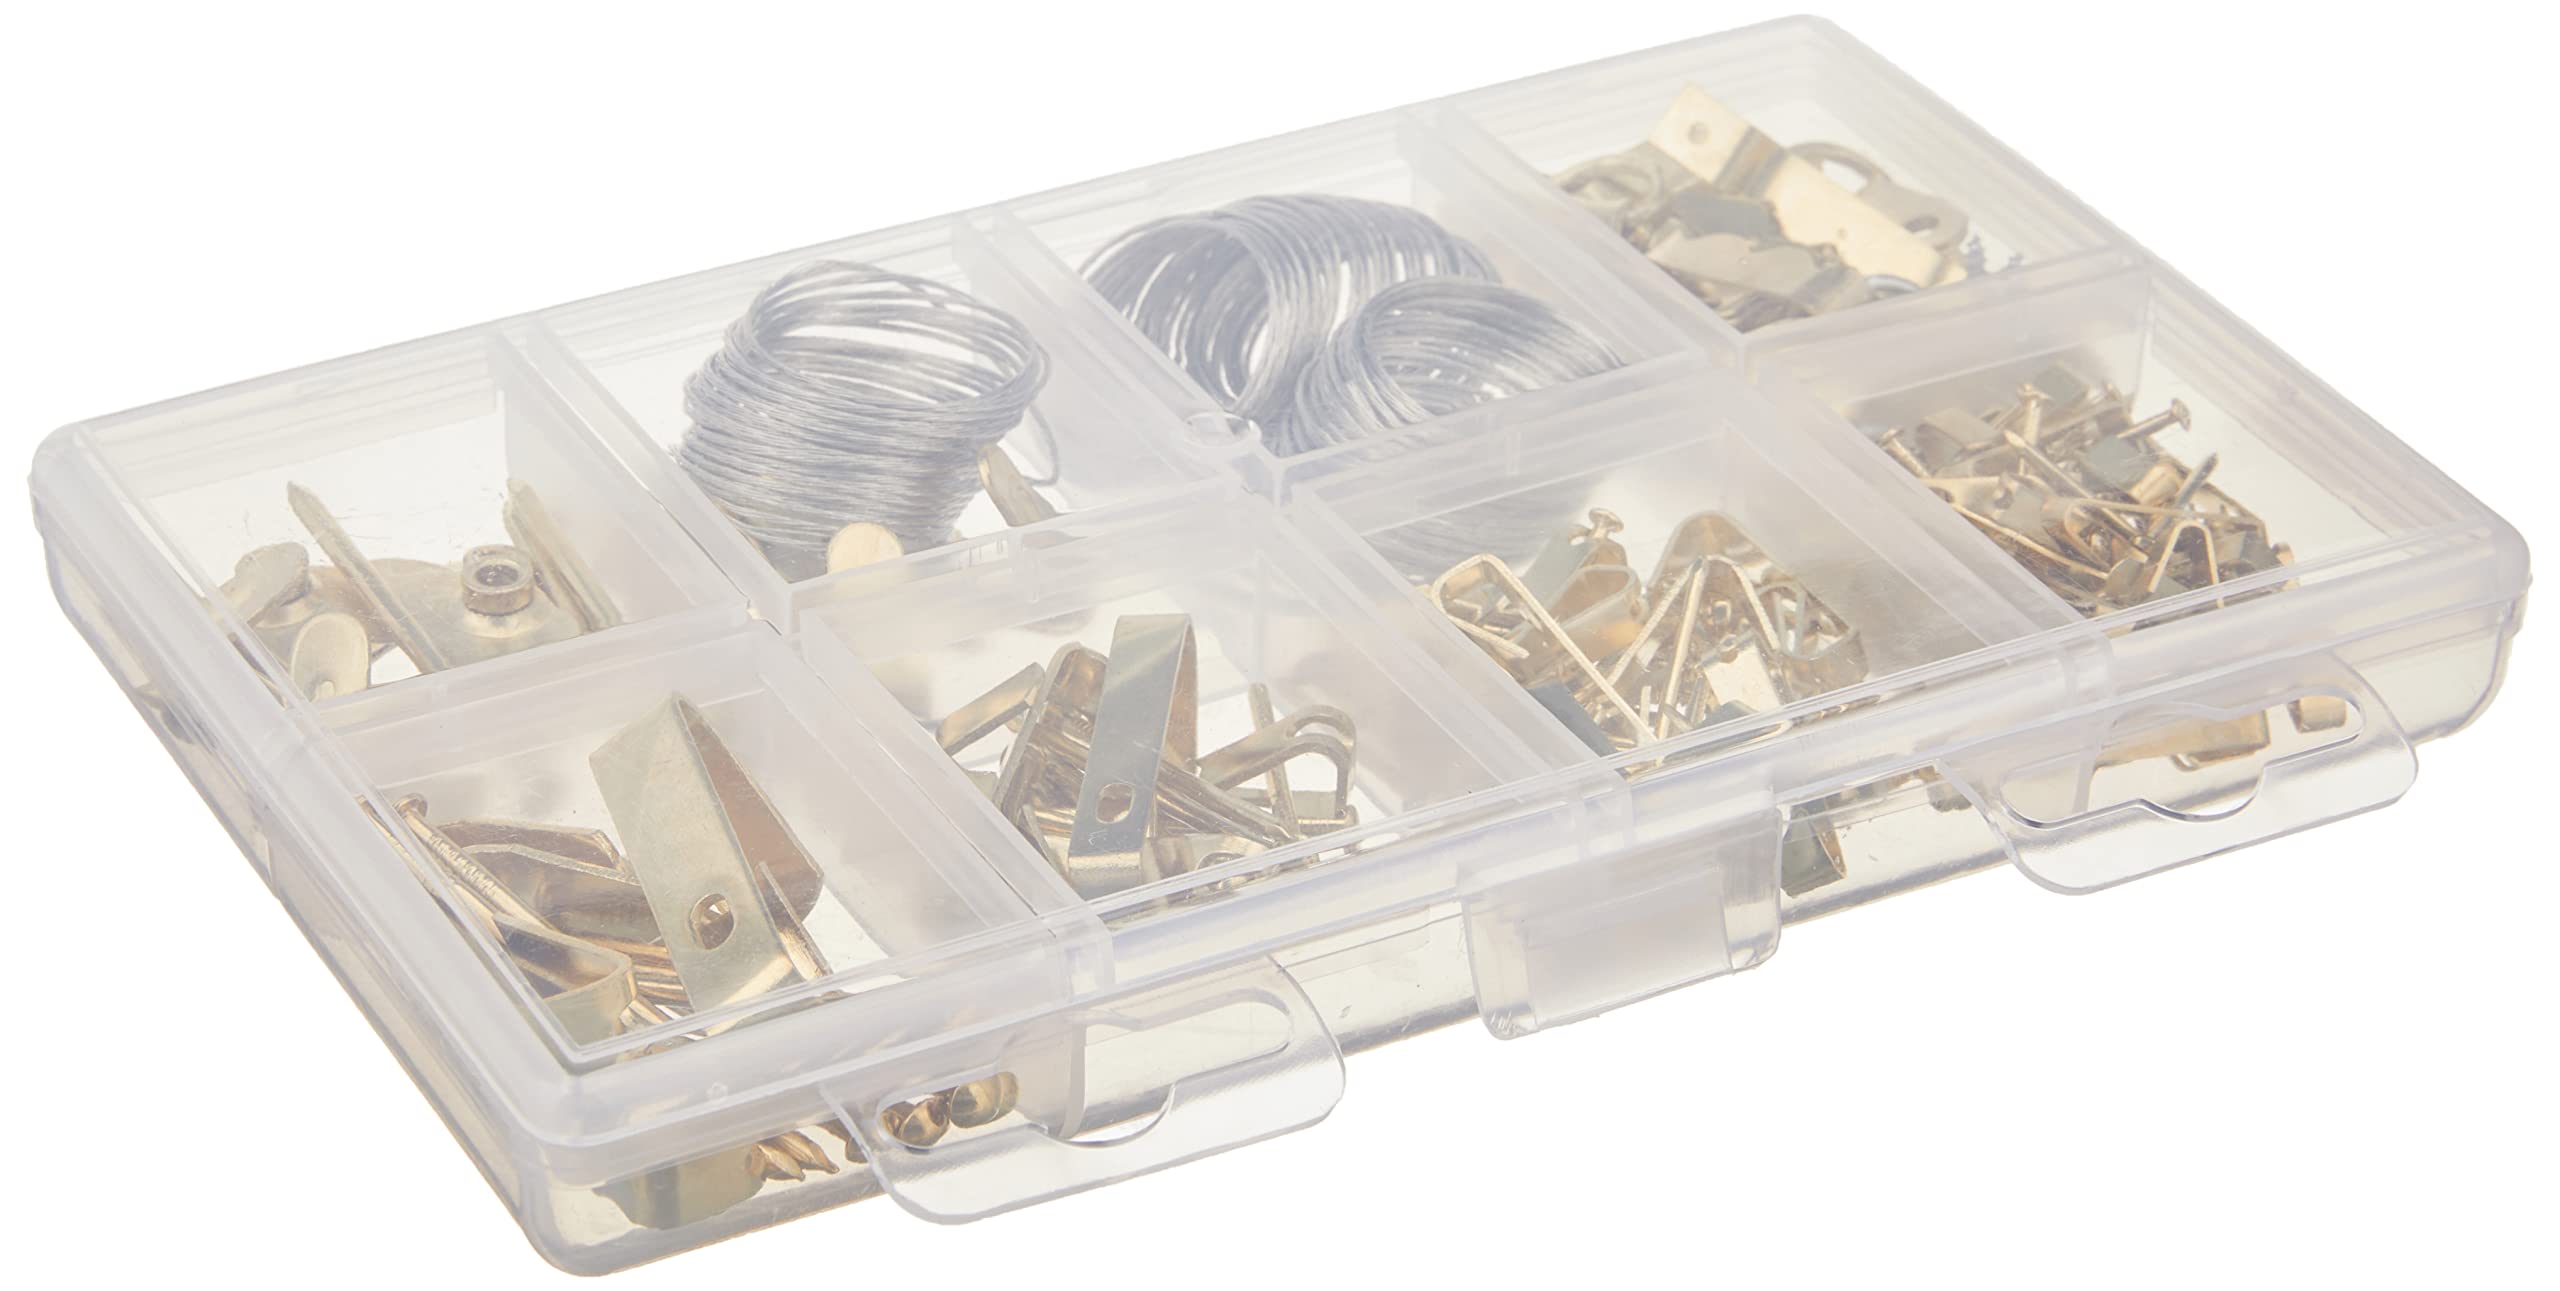 Amazon Basics AB-SK101 Picture Hanging Assortment Kit, Brass, 220-Piece Set, Selling Unit Dimension, Gold Plated